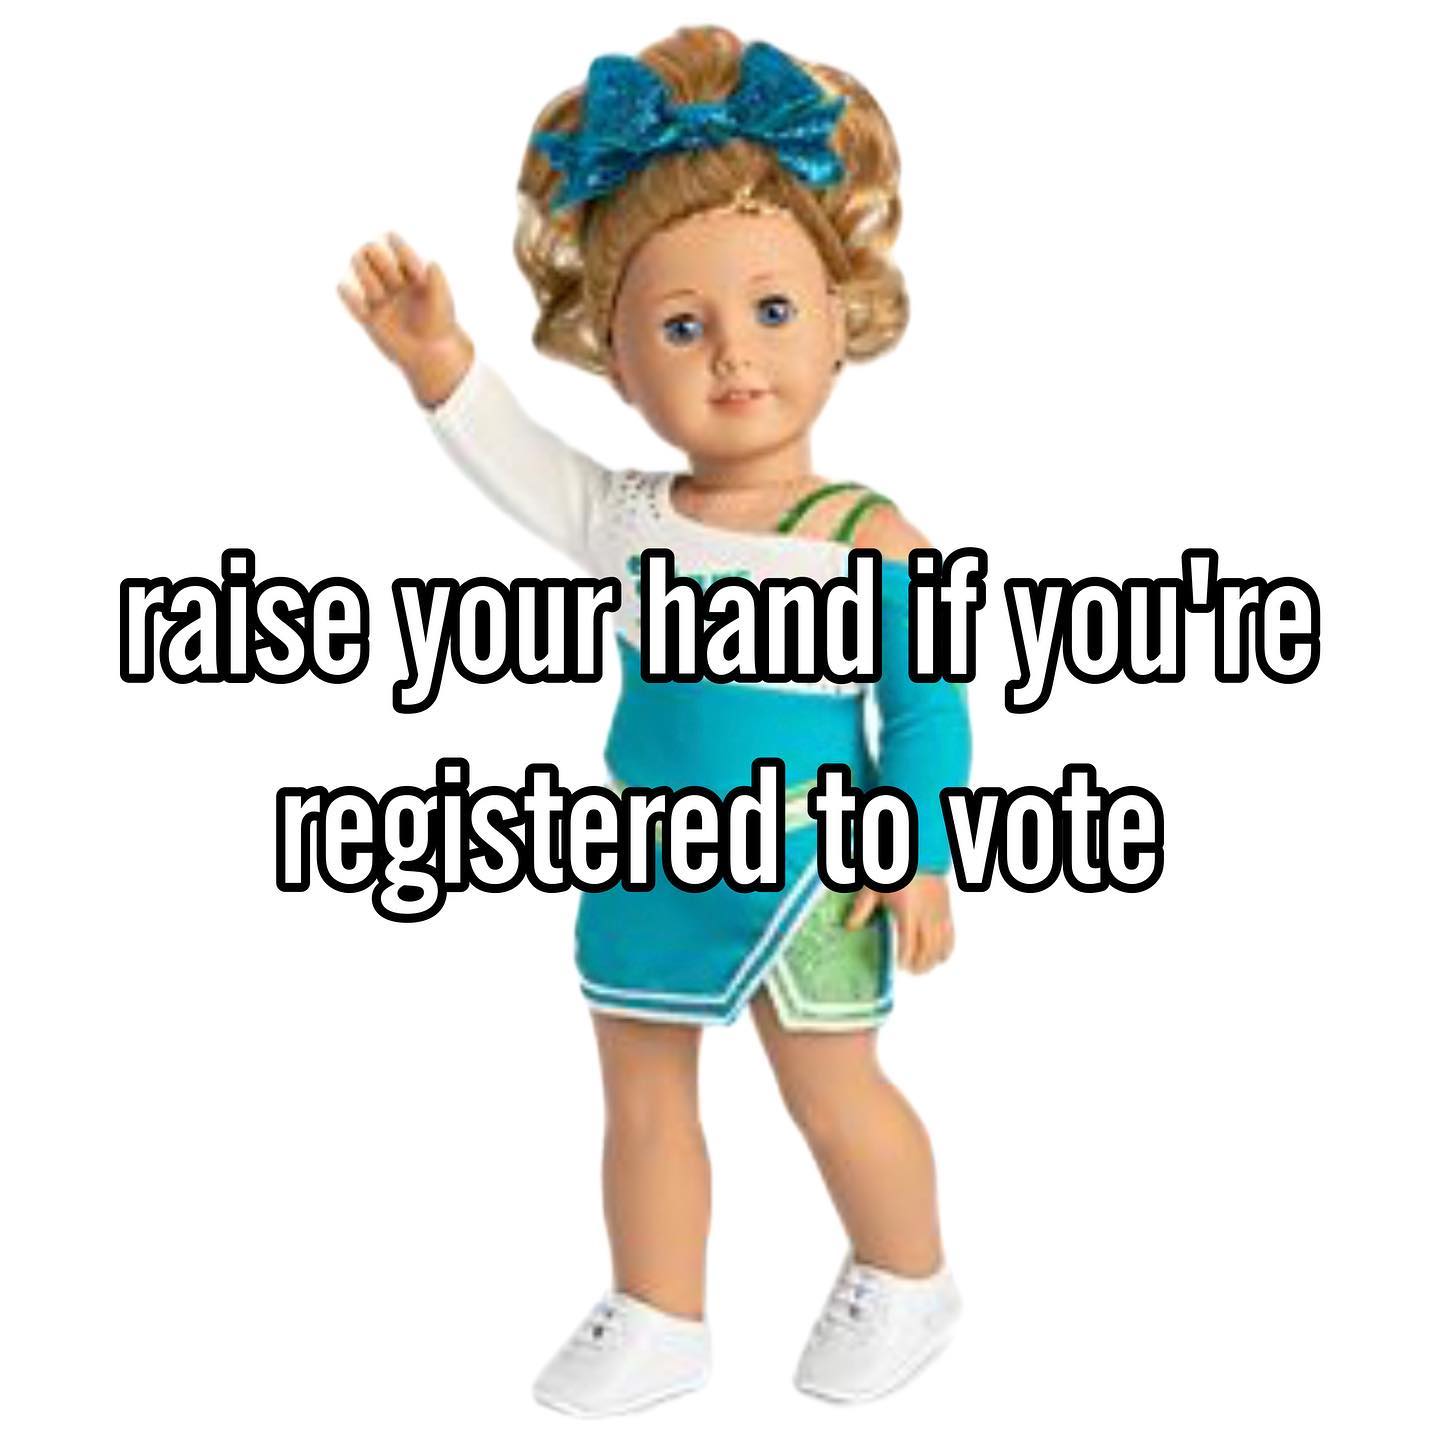 A blonde American Girl doll in a modern day cheerleading outfit raises her arm. Text overlaid on the image reads: “Raise your hand if you are registered to vote.”